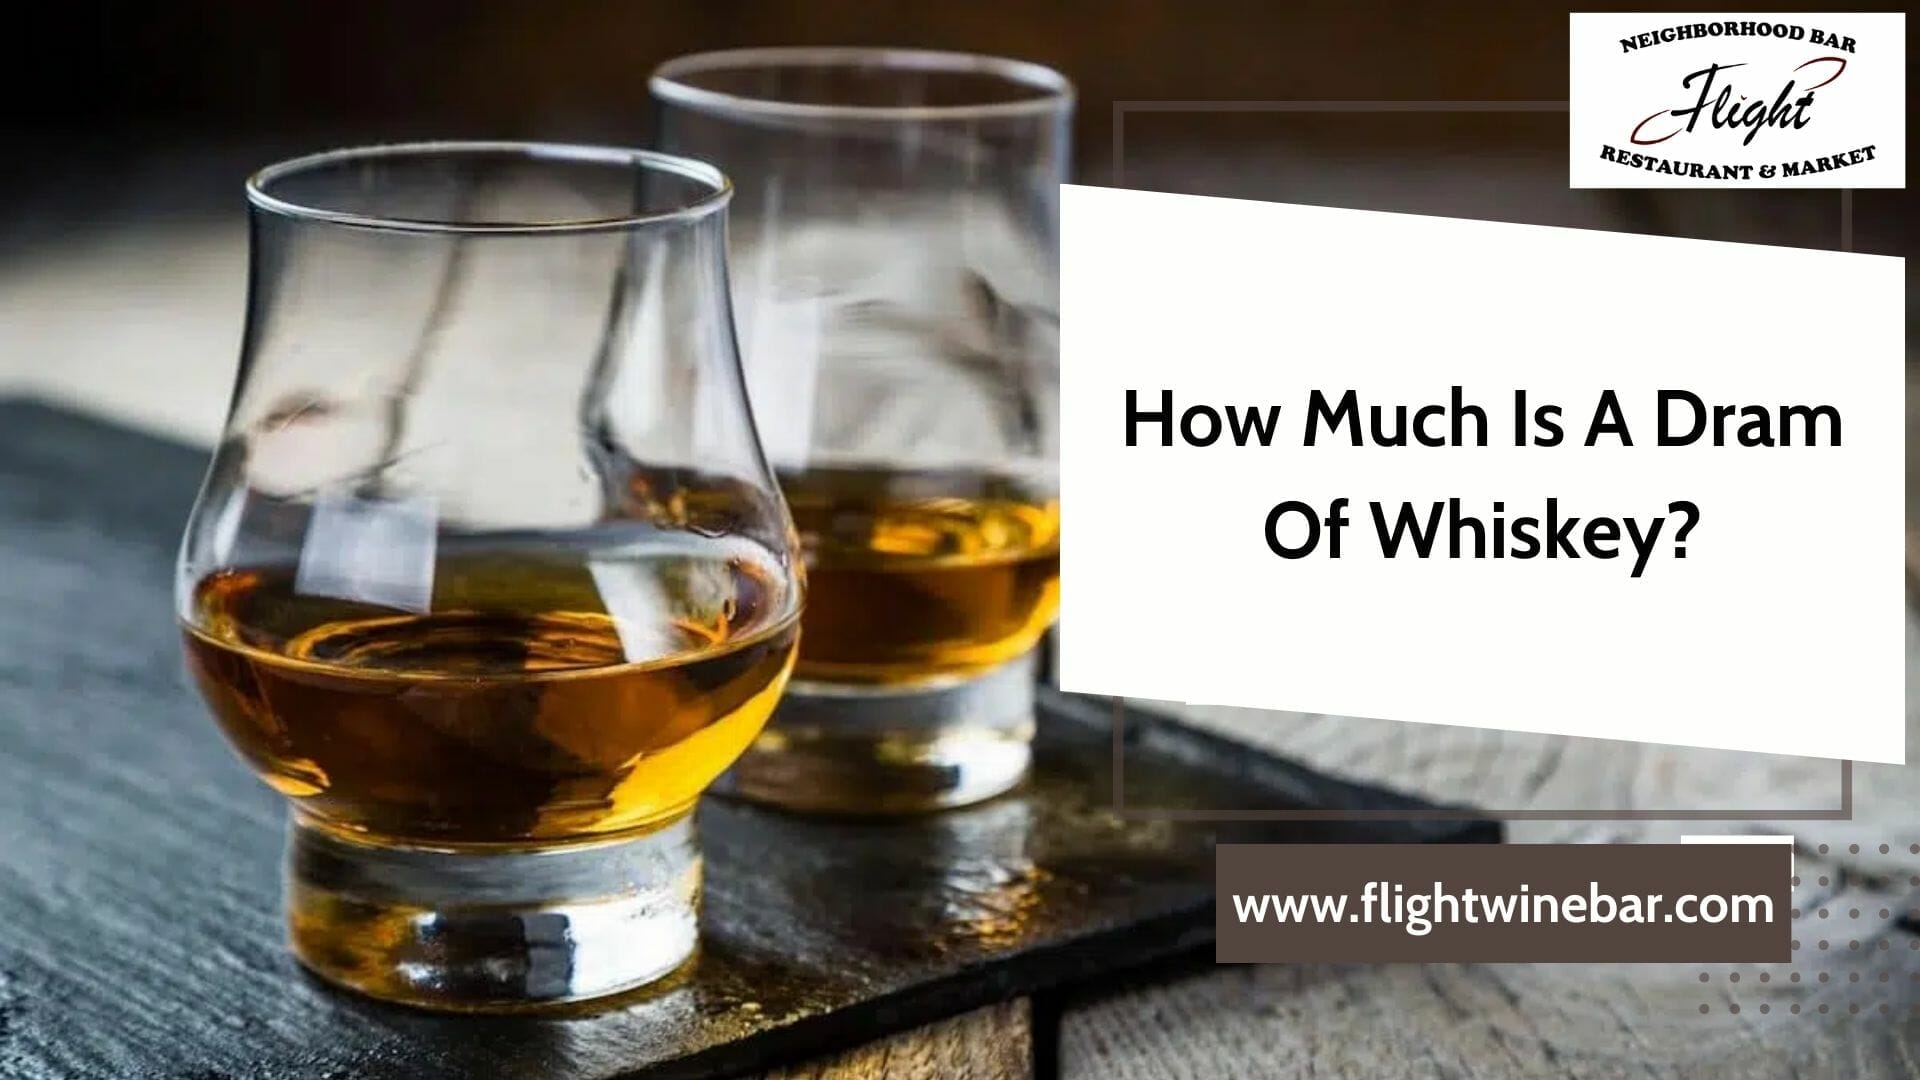 How Much Is A Dram Of Whiskey